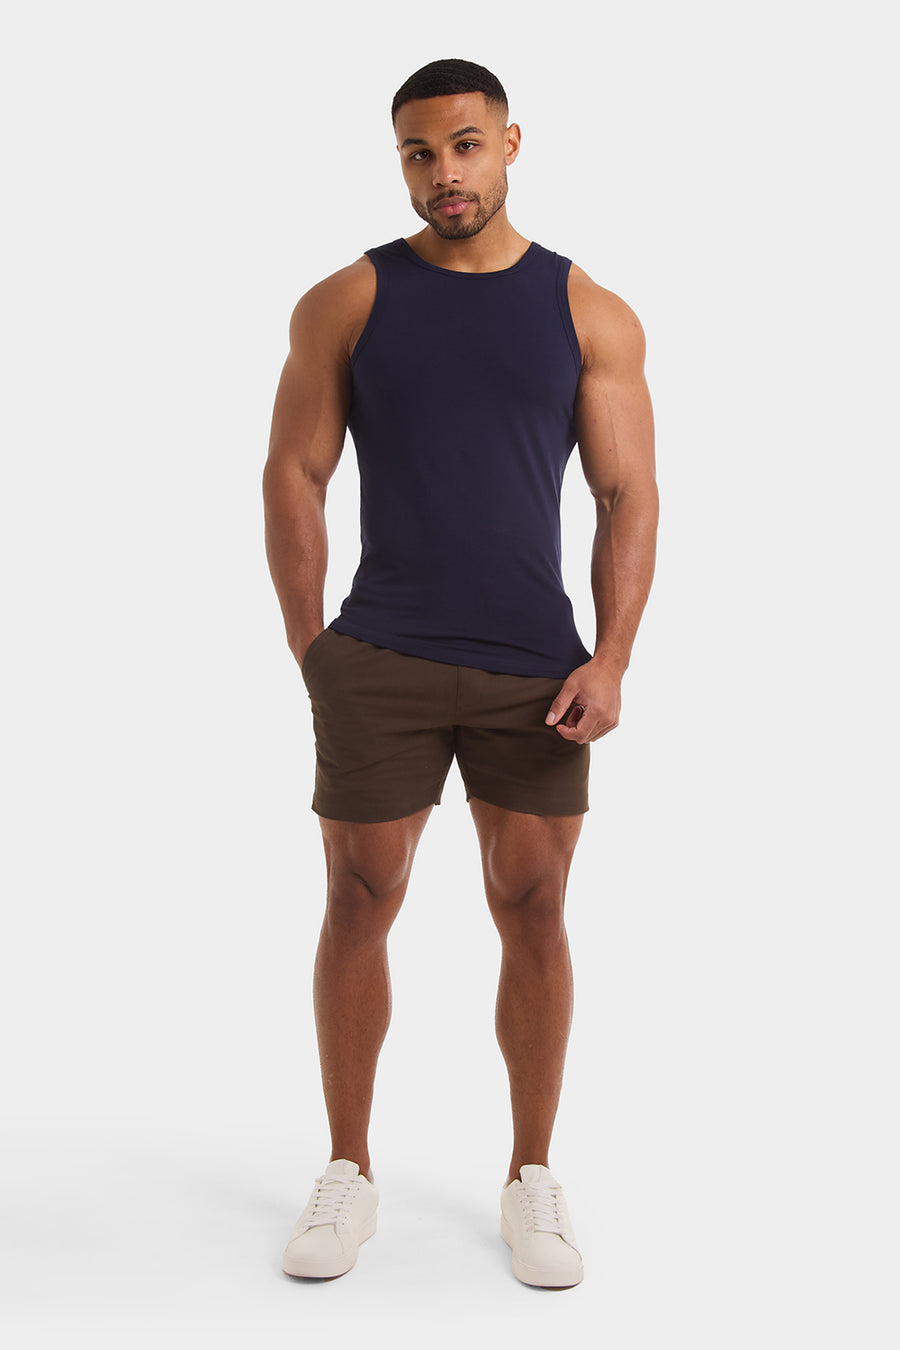 Athletic Fit Vest in True Navy - TAILORED ATHLETE - USA